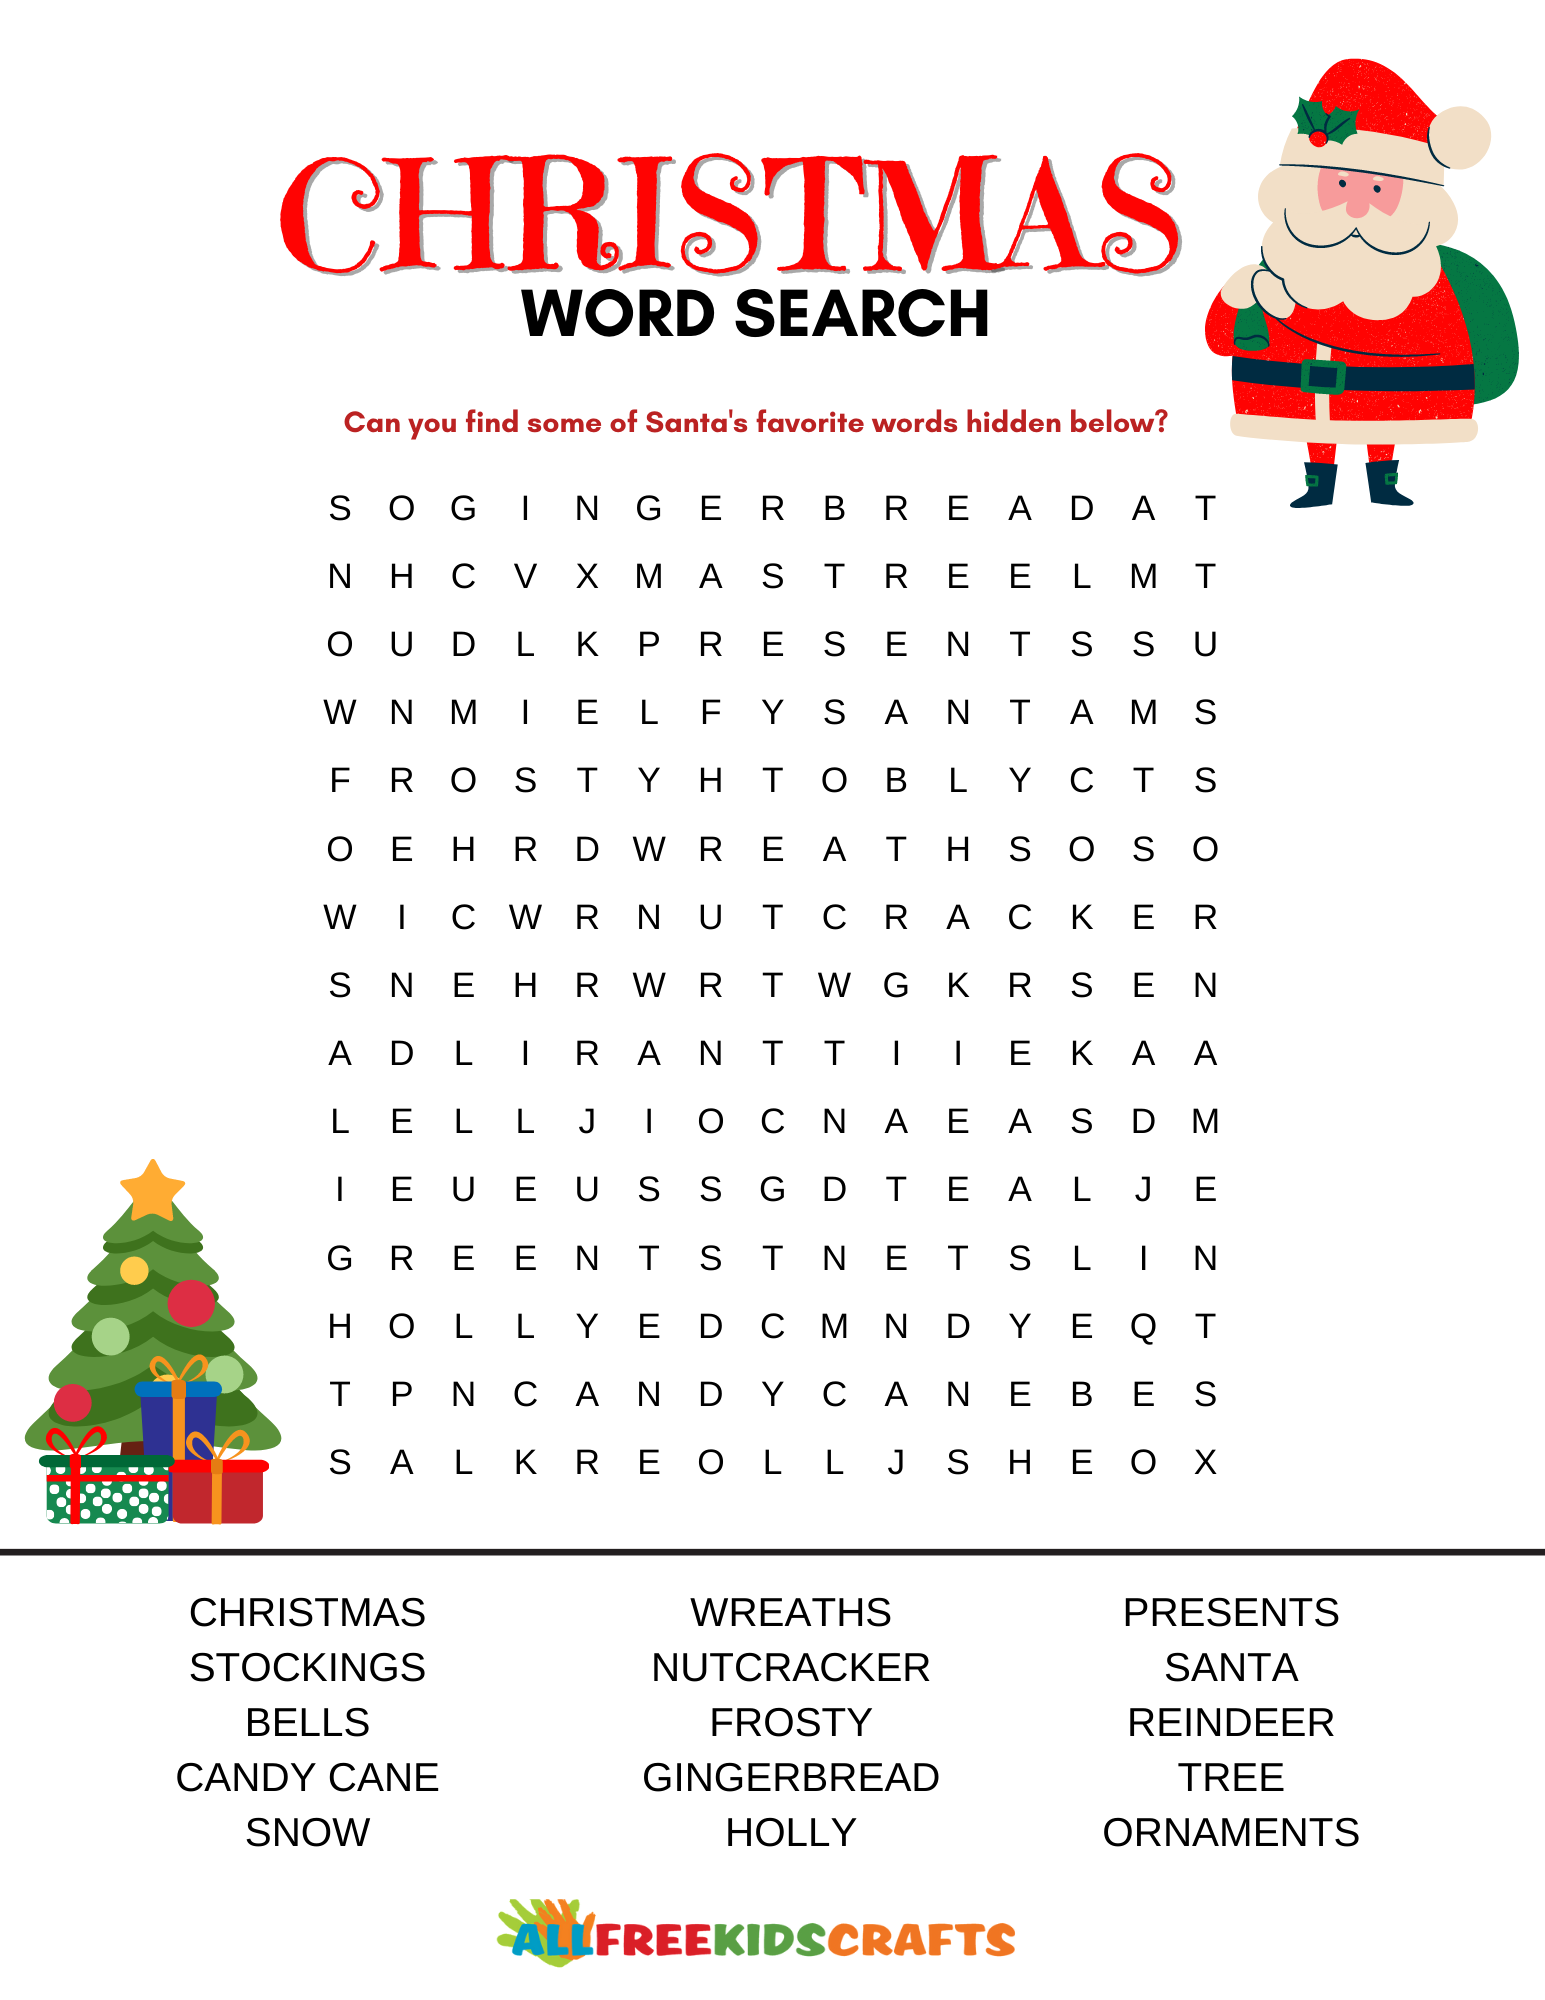 Christmas word search with answers